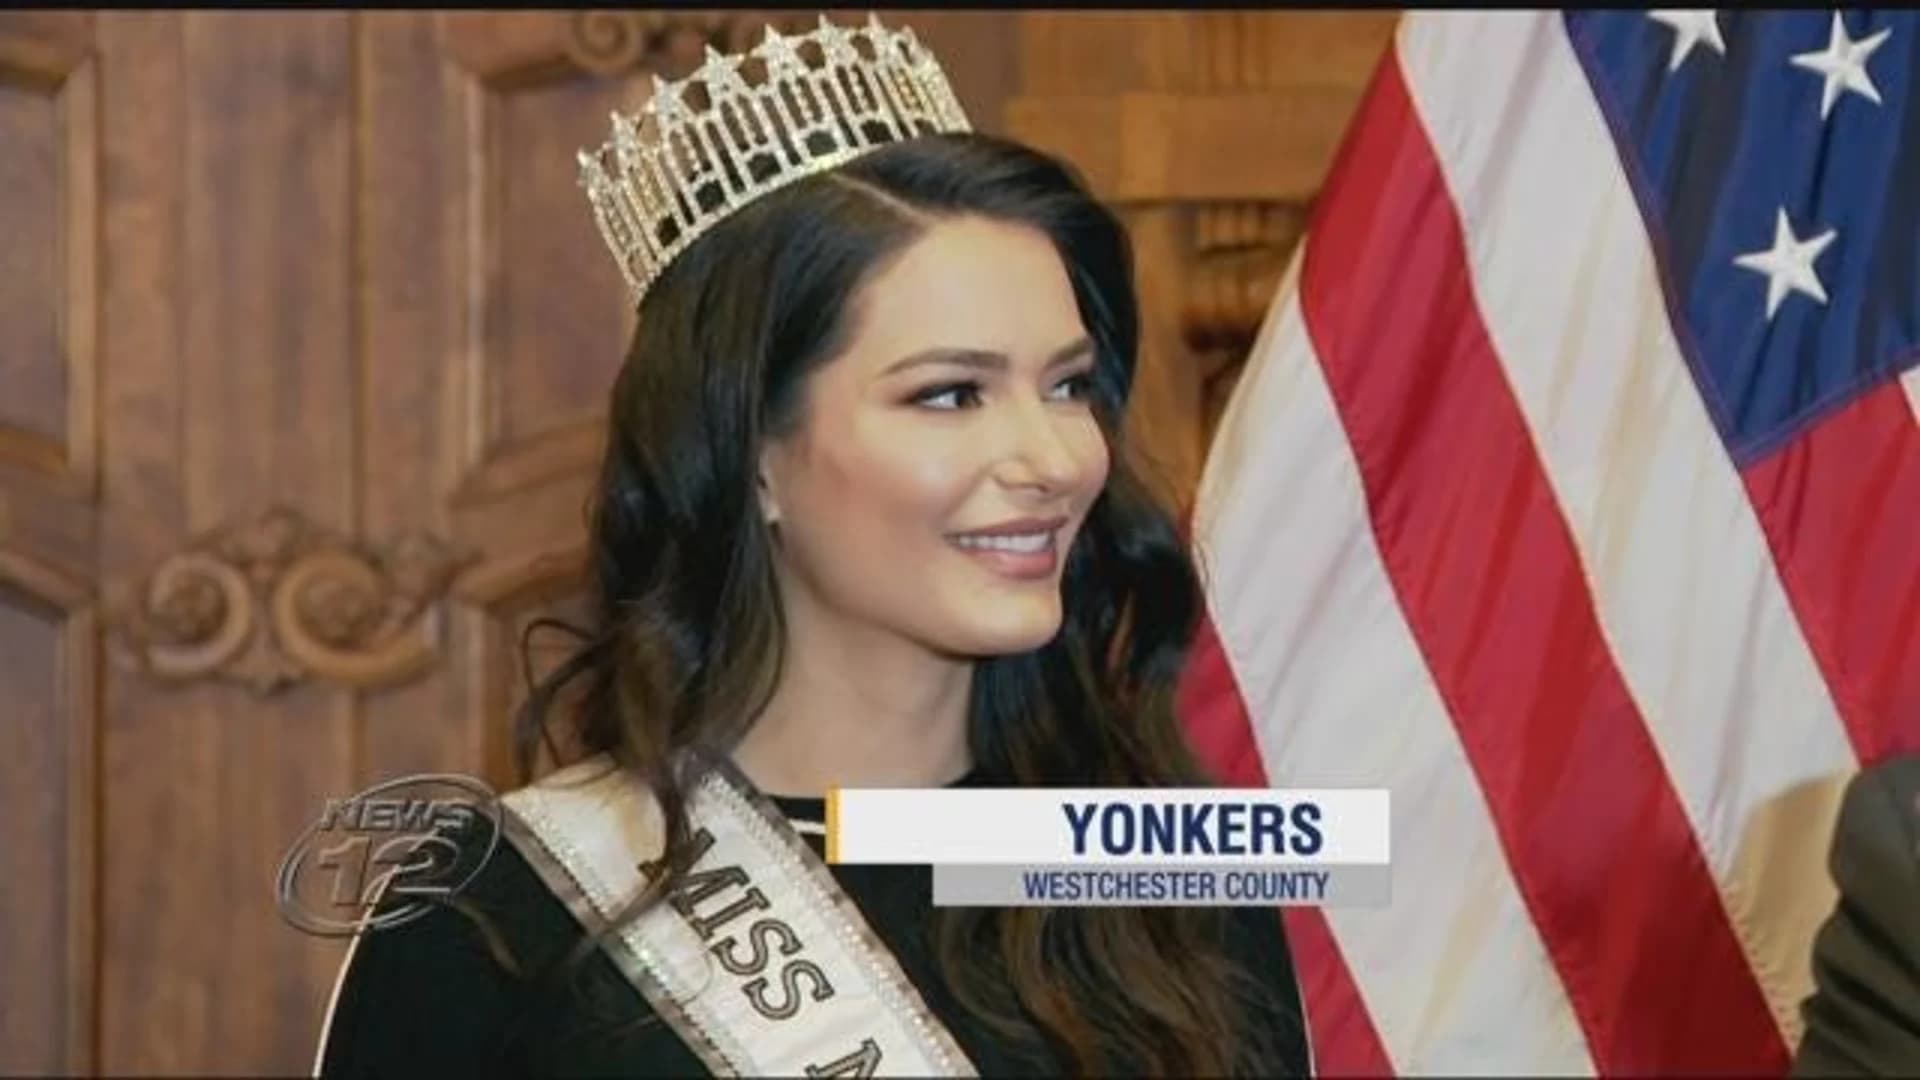 Yonkers native to compete in Miss USA Pageant